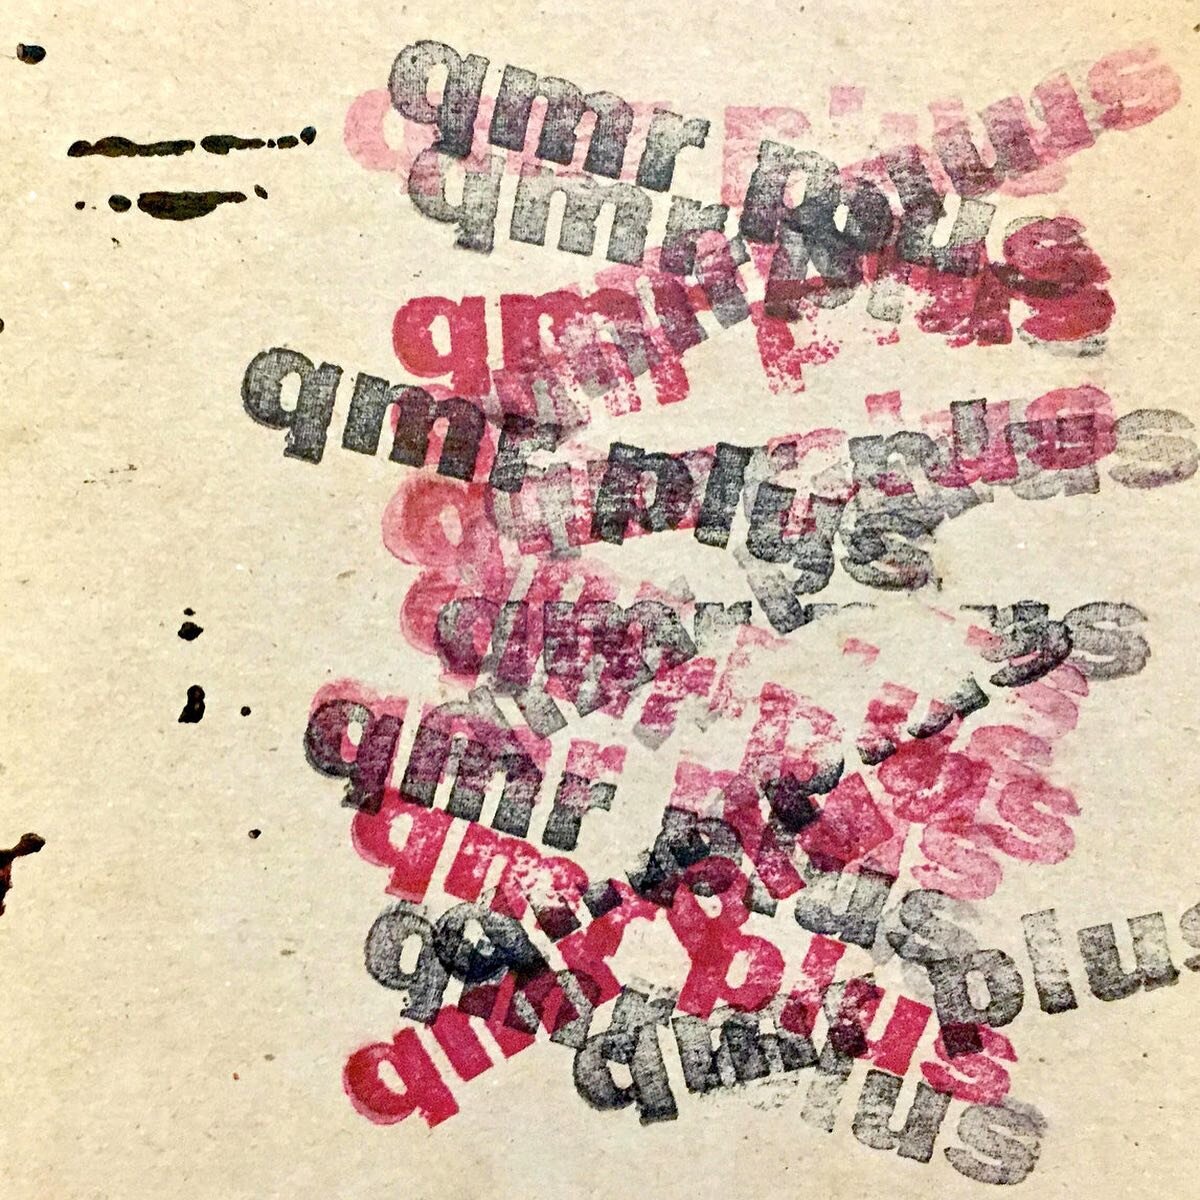 Reissued Today - The debut album from one of my first serious musical projects, QMRplus, 𝑳𝒊𝒗𝒆! was stitched together from live recordings we&rsquo;d made over the span of January-June, 2005. Having gigged extensively around New Orleans for the pr